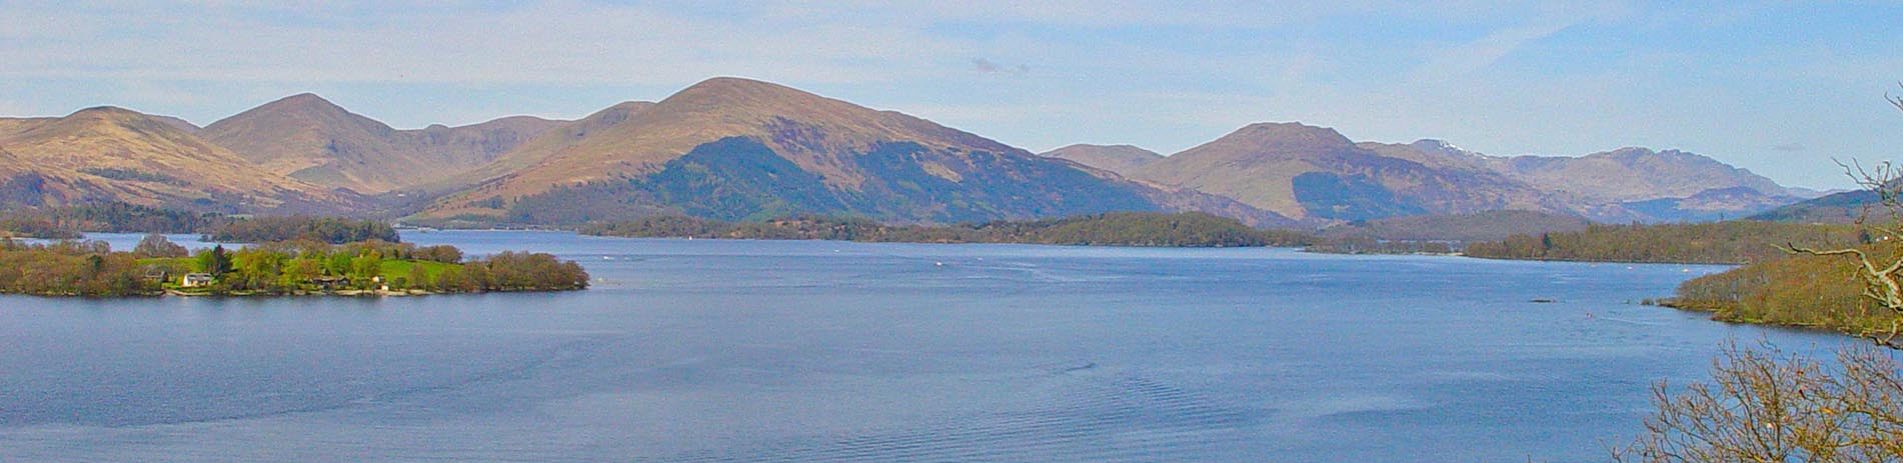 view-from-craigie-fort-in-balmaha-over-loch-lomond-its-islands-and-luss-hills